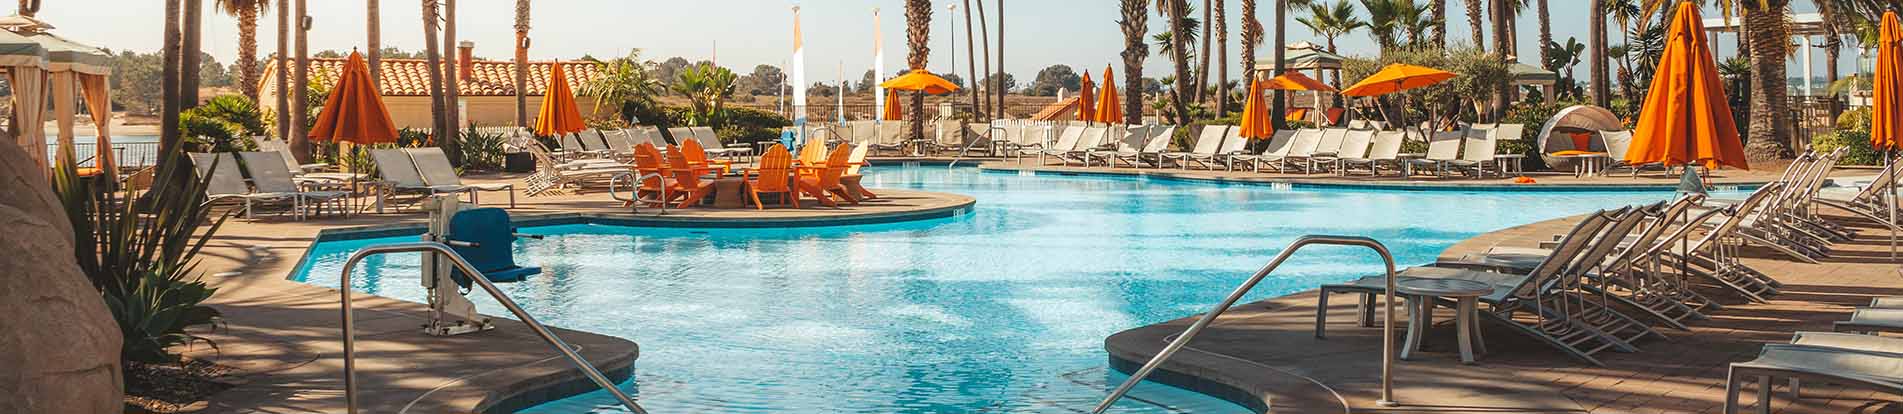 Top 5 luxurious places to stay in Los Angeles to make your holiday better!